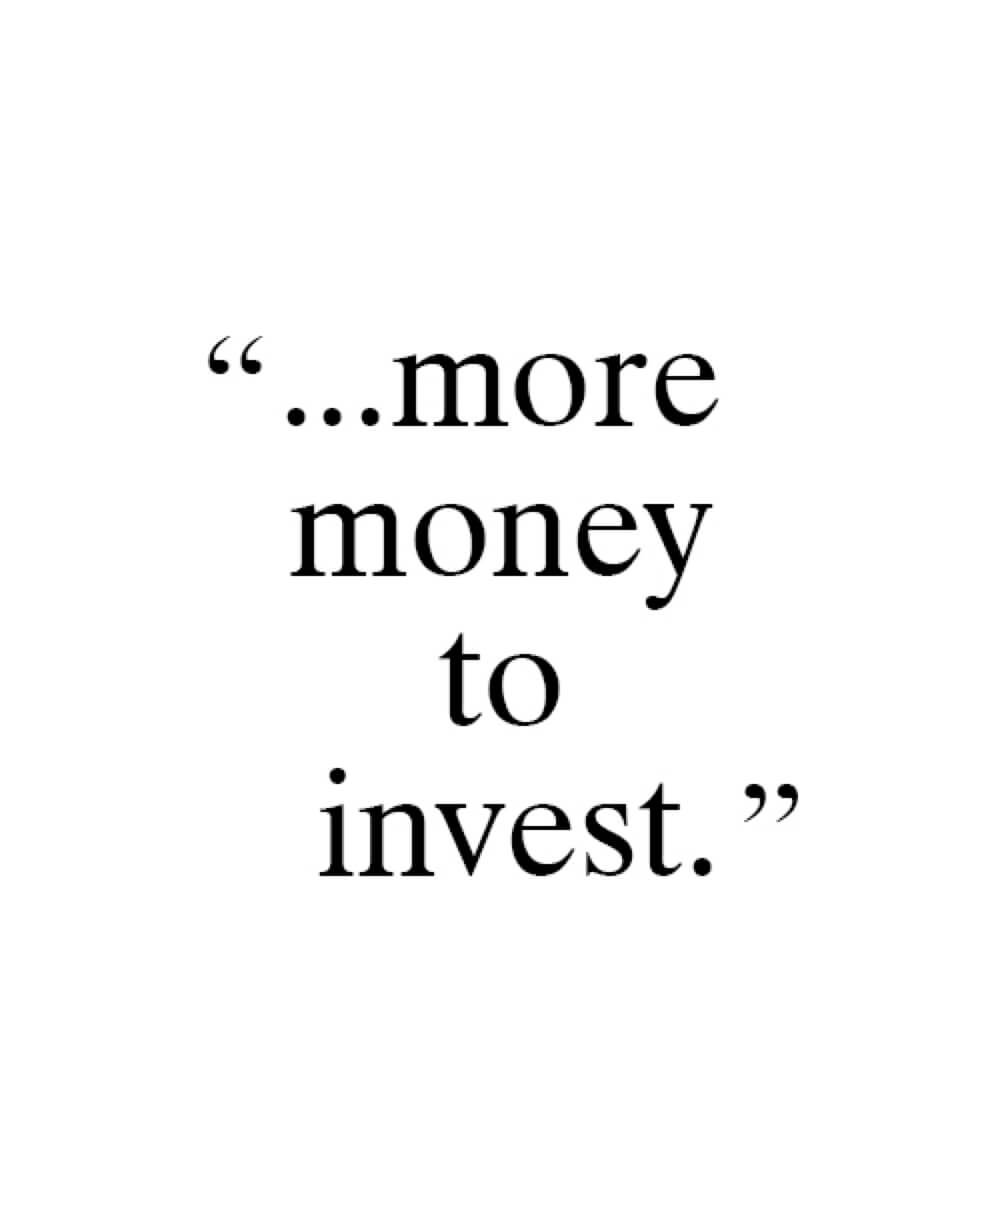 The words more money to invest.